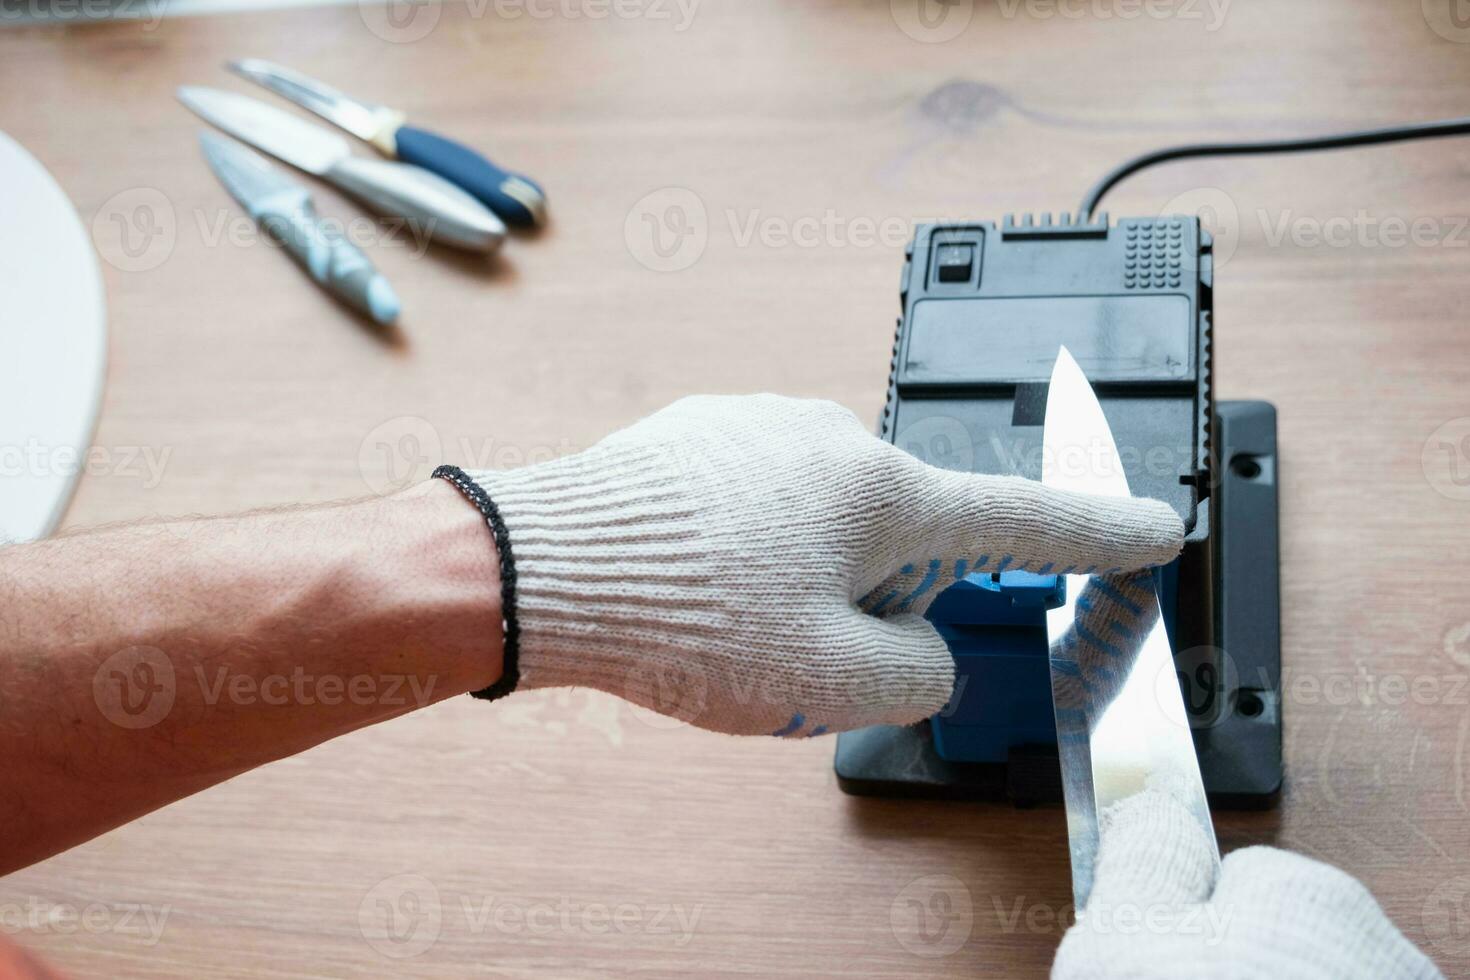 Sharpening a knife on an electric sharpener at home. The man's hand drives the knife blade between the blue sharpeners, dust flies on the machine. photo